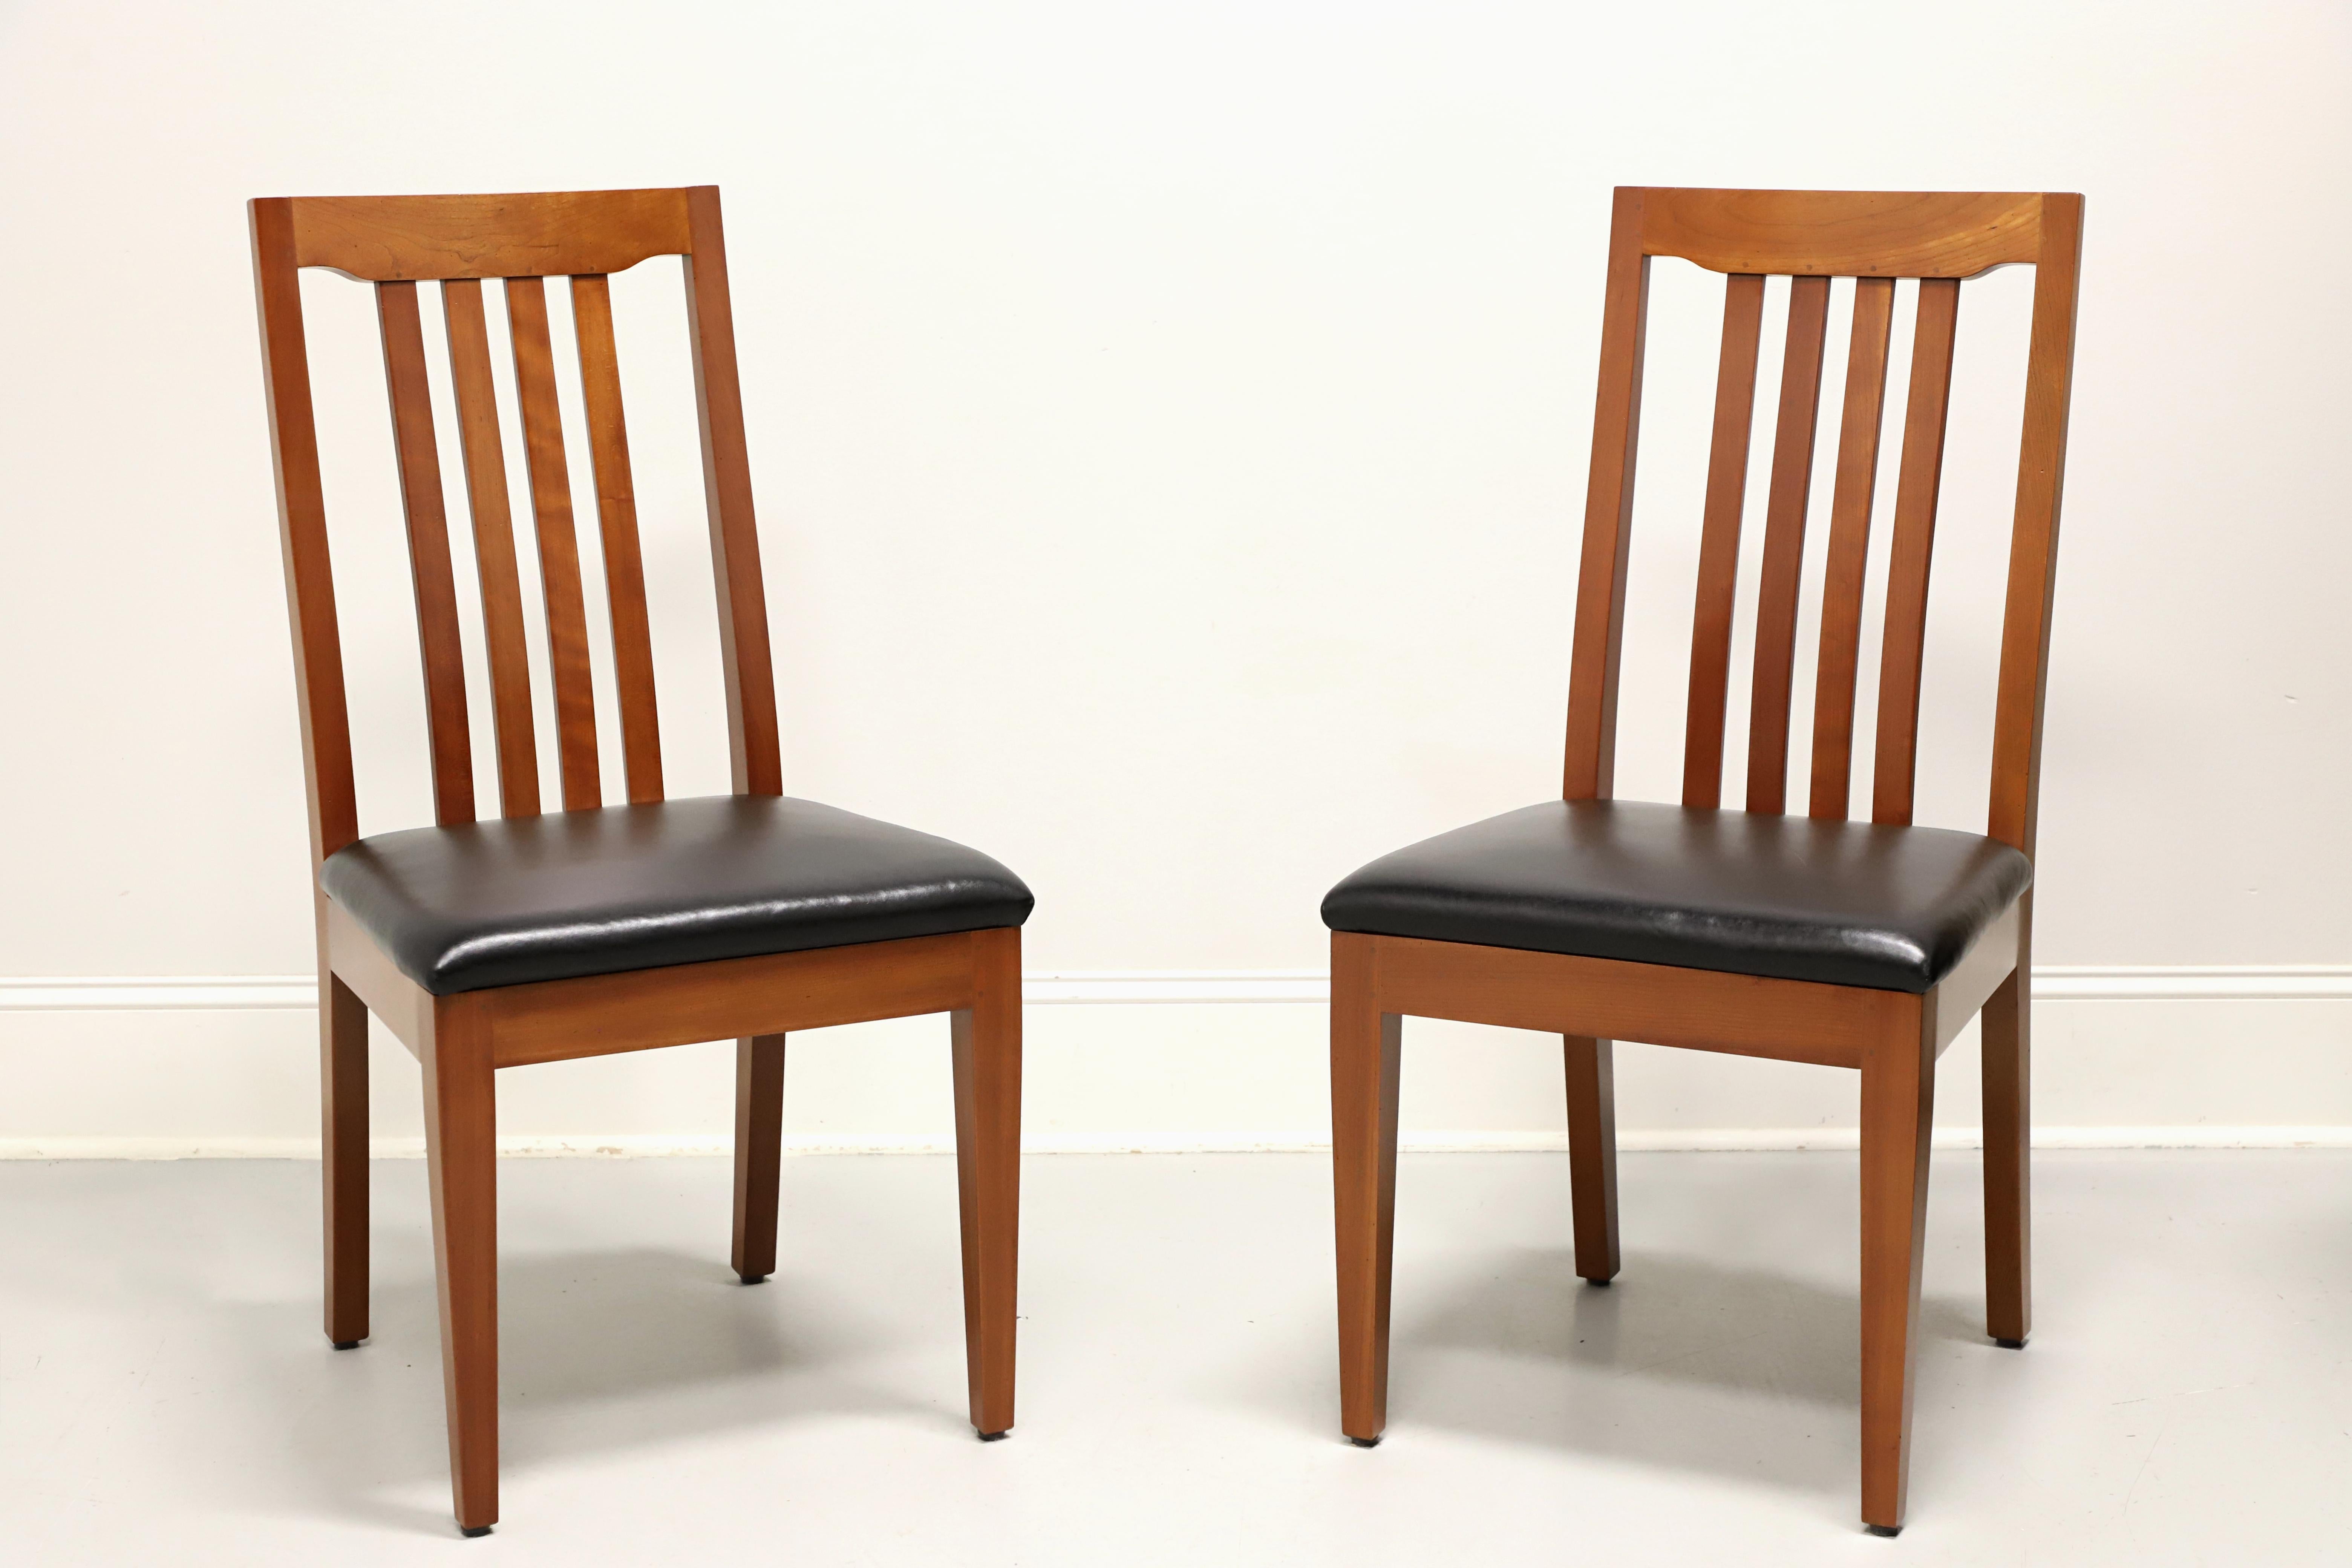 ROBERT BERGELIN Custom Solid Cherry Mission Dining Side Chairs - Pair B For Sale 5